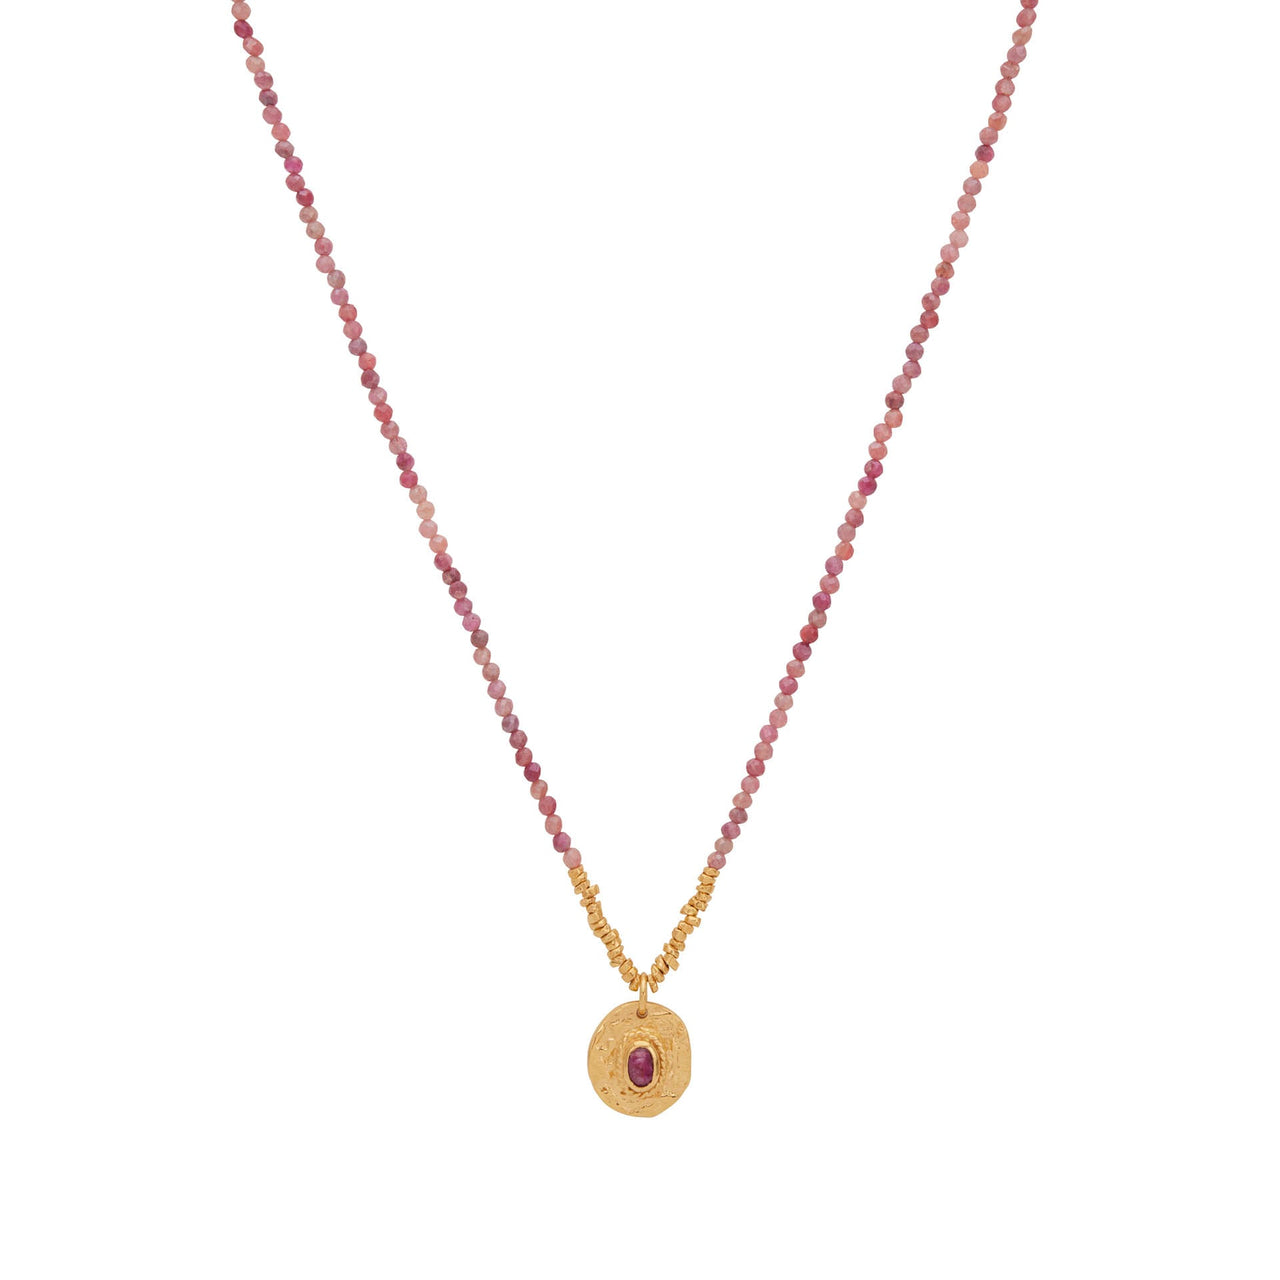 ARTEMIS SMALL RUBY NECKLACE